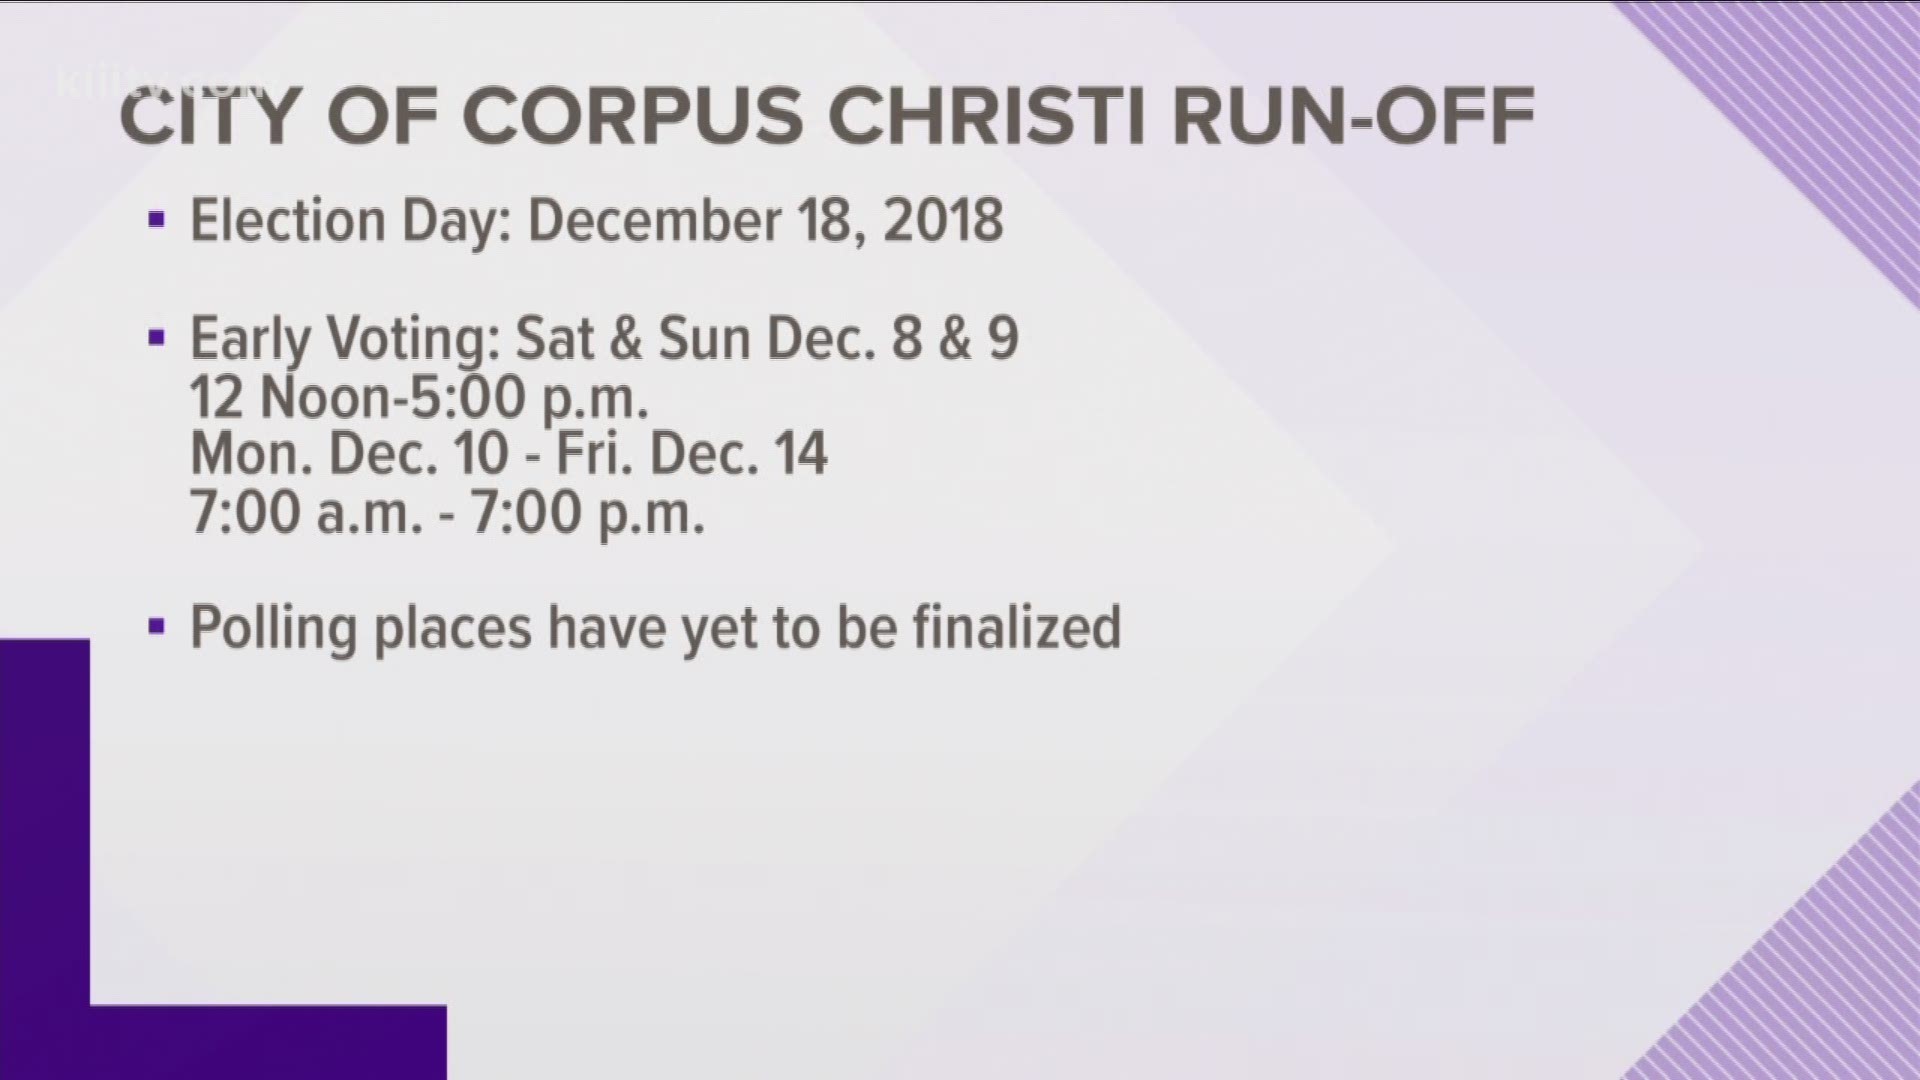 The City of Corpus Christi has officially set the date for five runoff elections to be held Dec. 13.